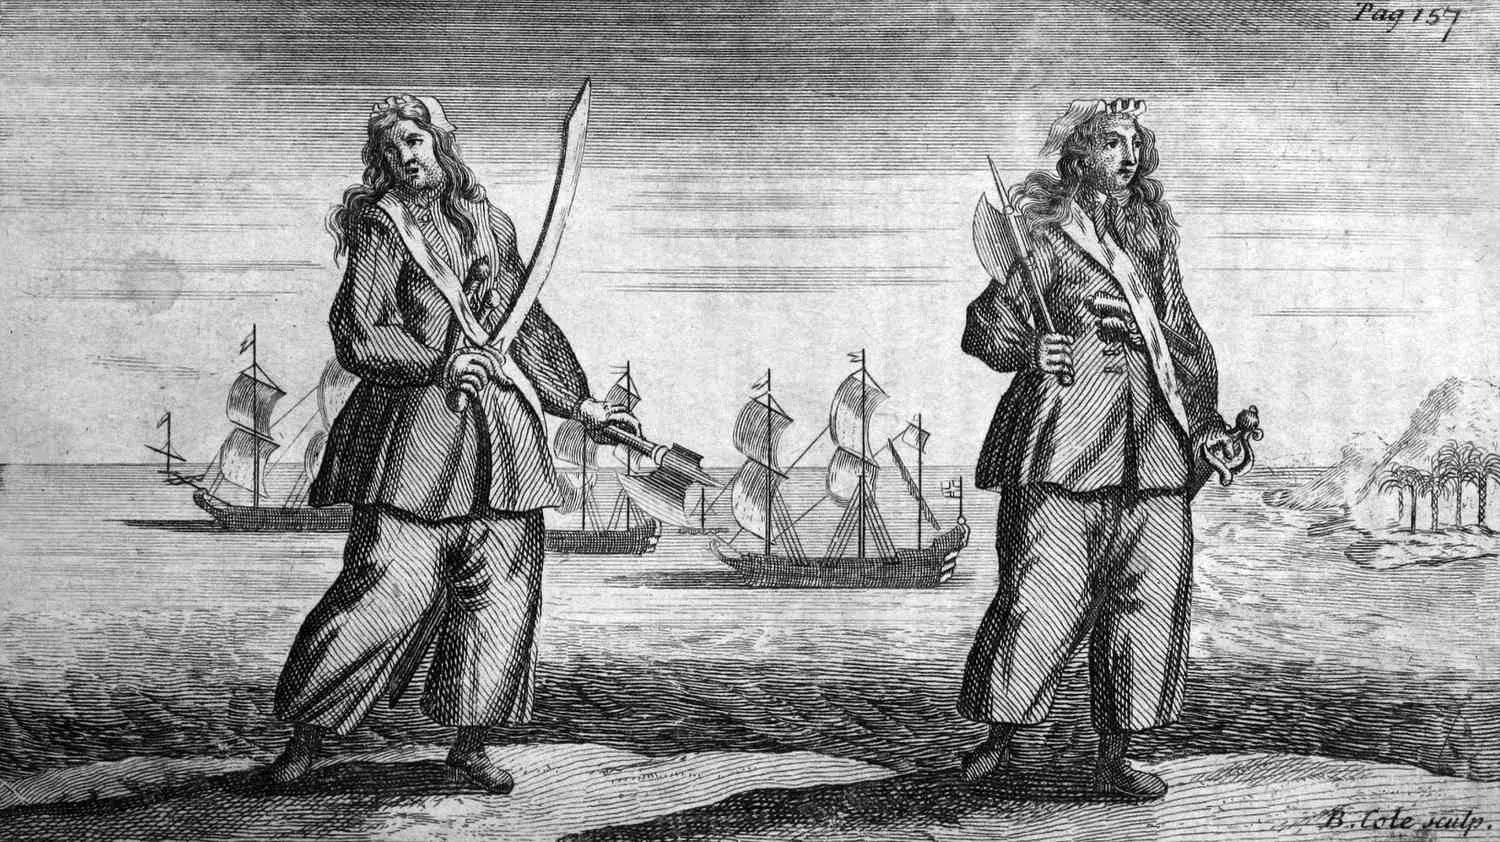 Old illustration of pirates standing on a shore with ships in the background